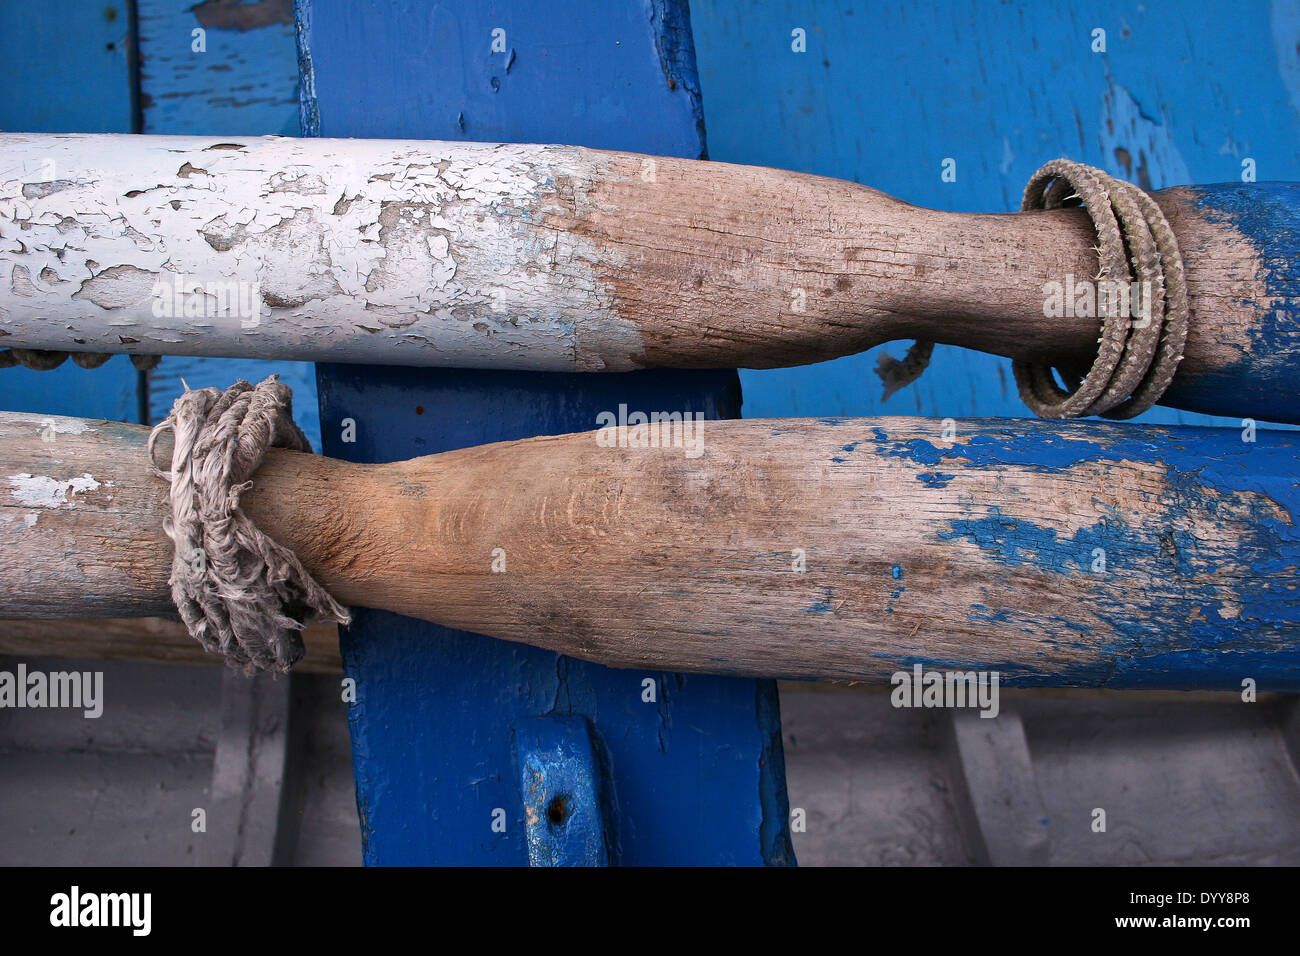 Close up of cobalt blue wooden boat and Oars, Amalfi Coast, Italy Stock Photo